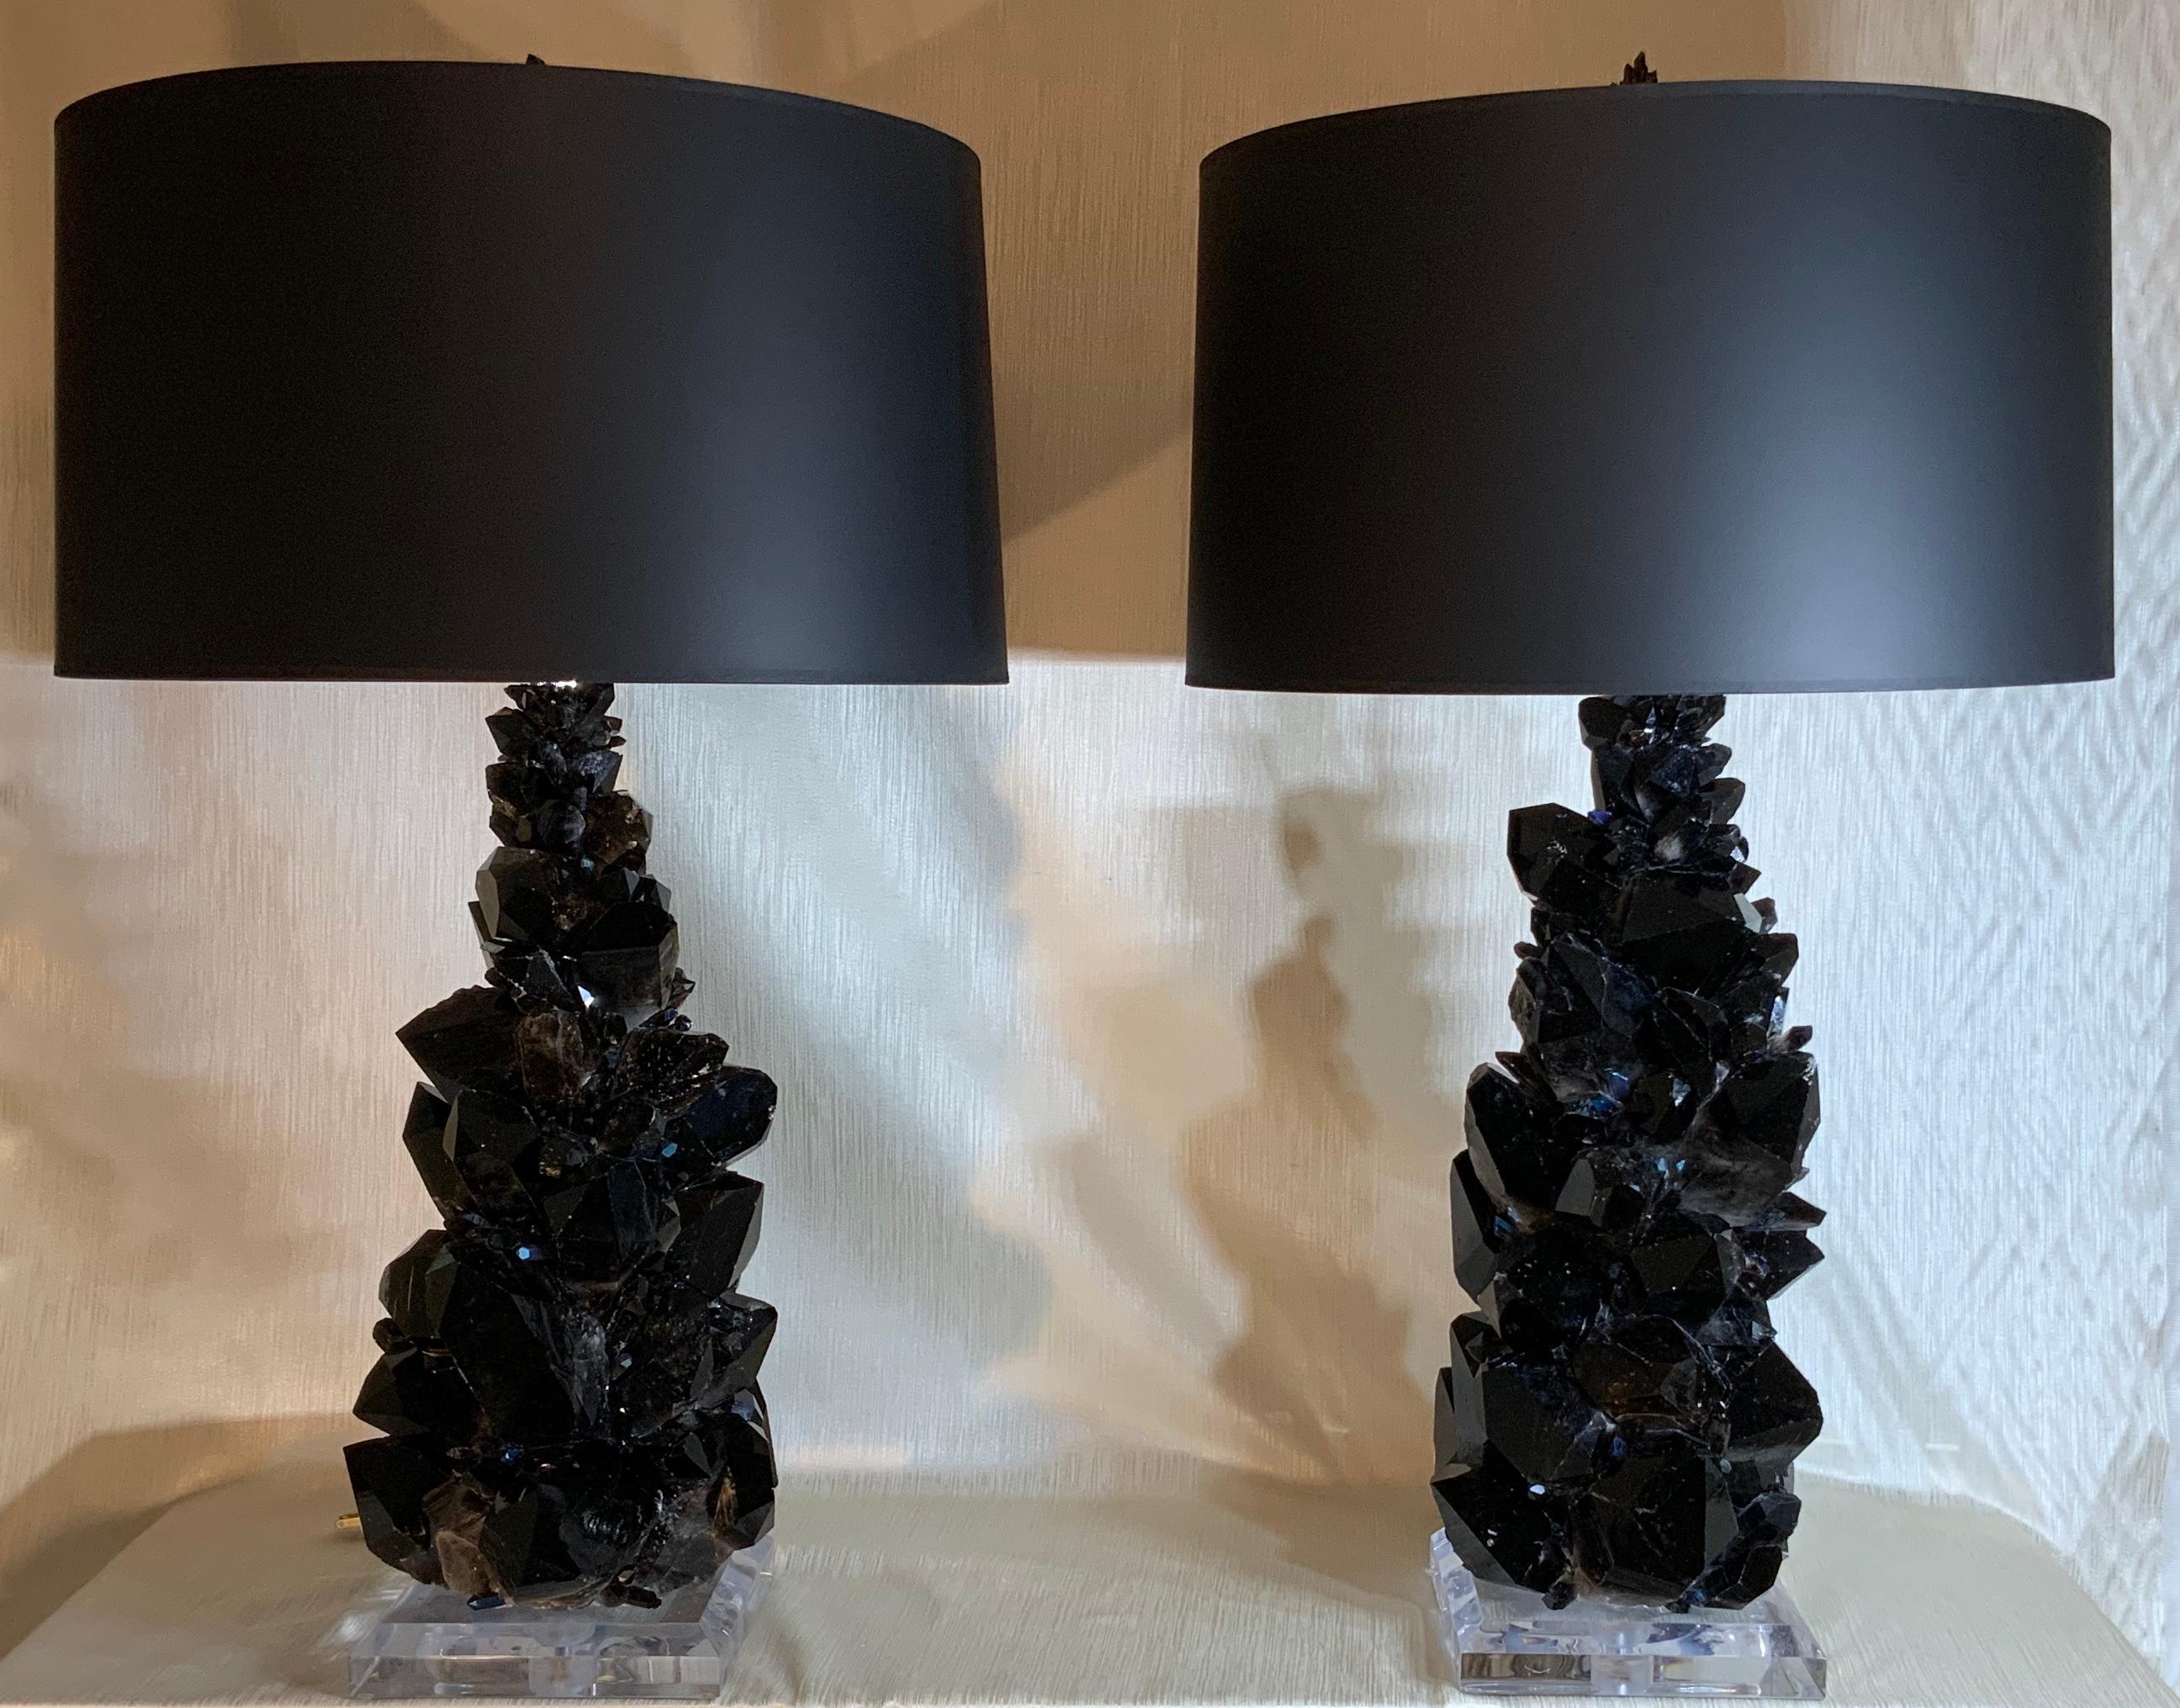 Exceptional pair of table lamps made of large and smaller genuine black and smoky color rock quartz crystal pieces, artistically put together to make beautiful and impressive pair of table lamps.
Beveled Lucite base 8” x 8” x 1.5
Height of the lamp